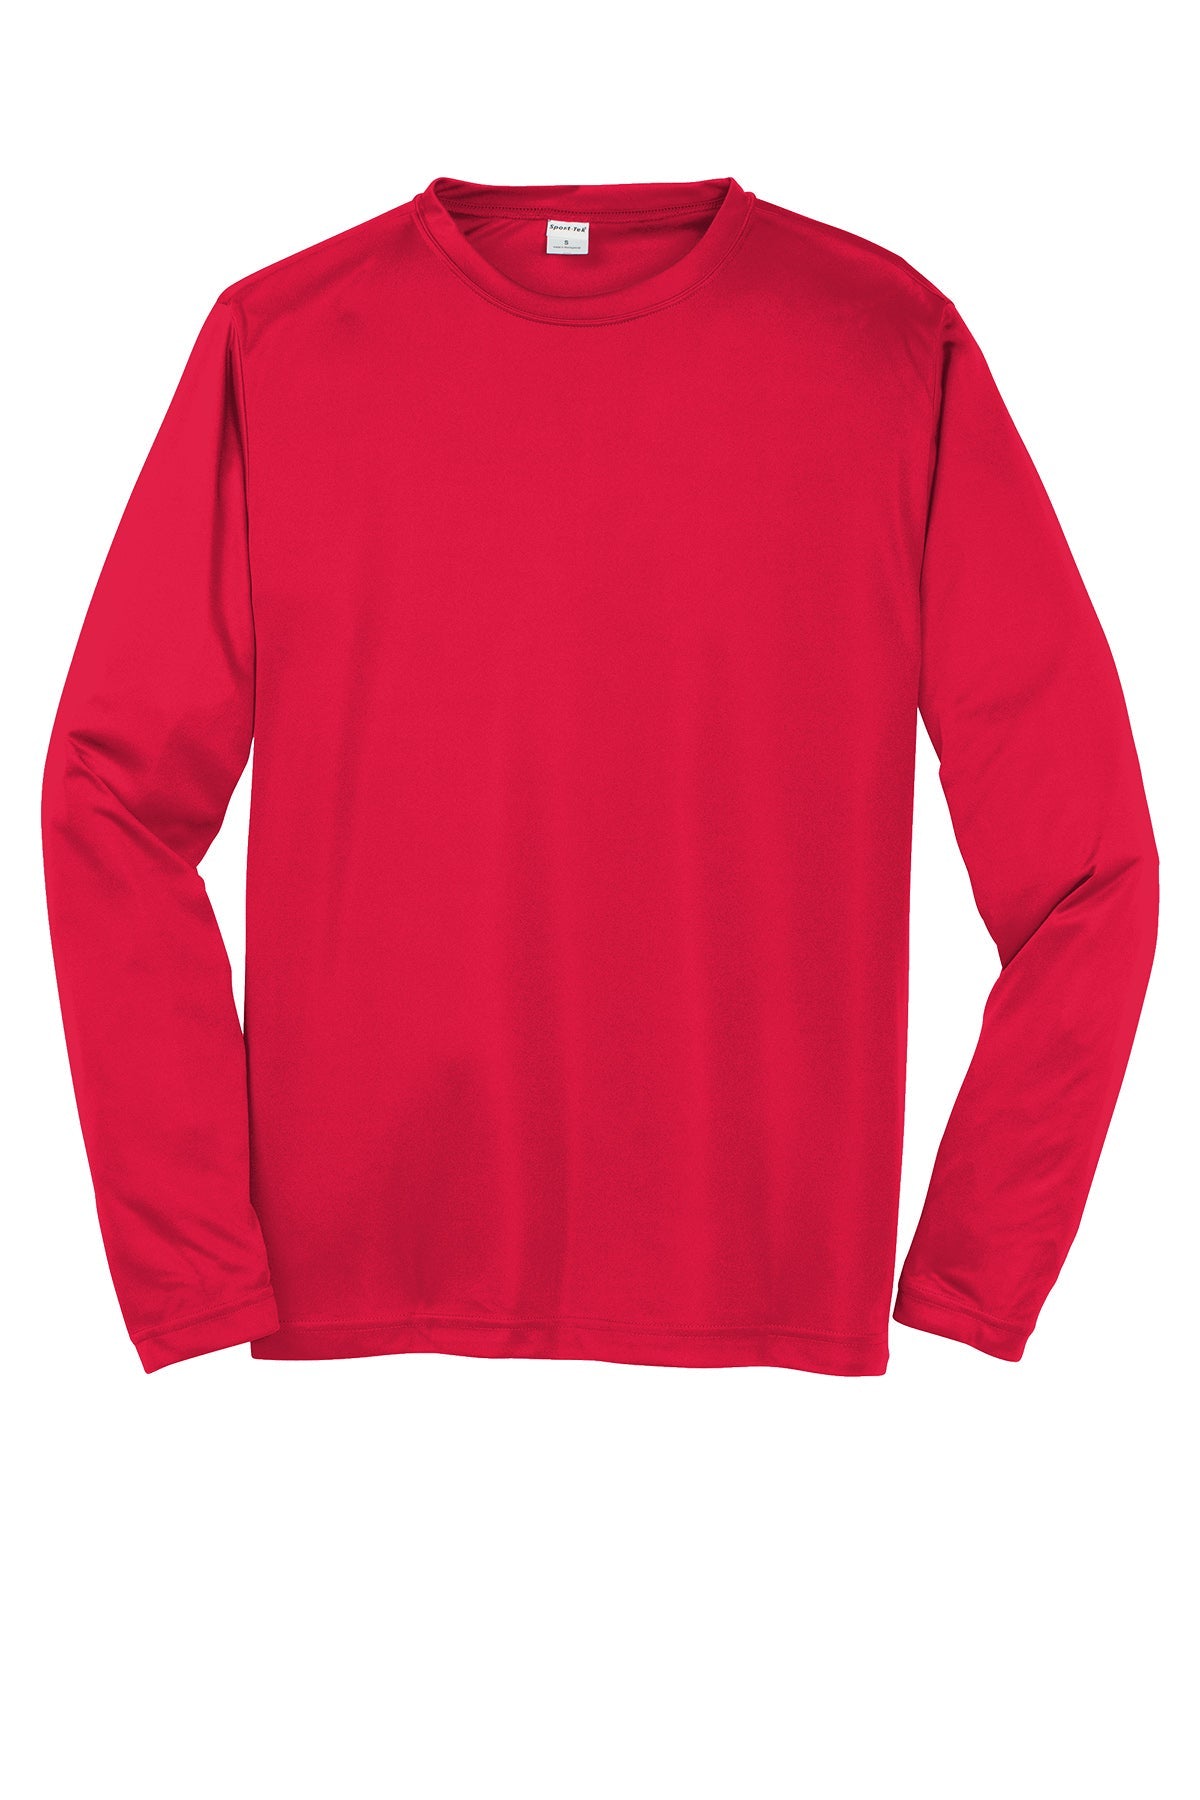 Sport-Tek St350Ls Polyester Adult Long Sleeve T-Shirt Ad Small / True Red